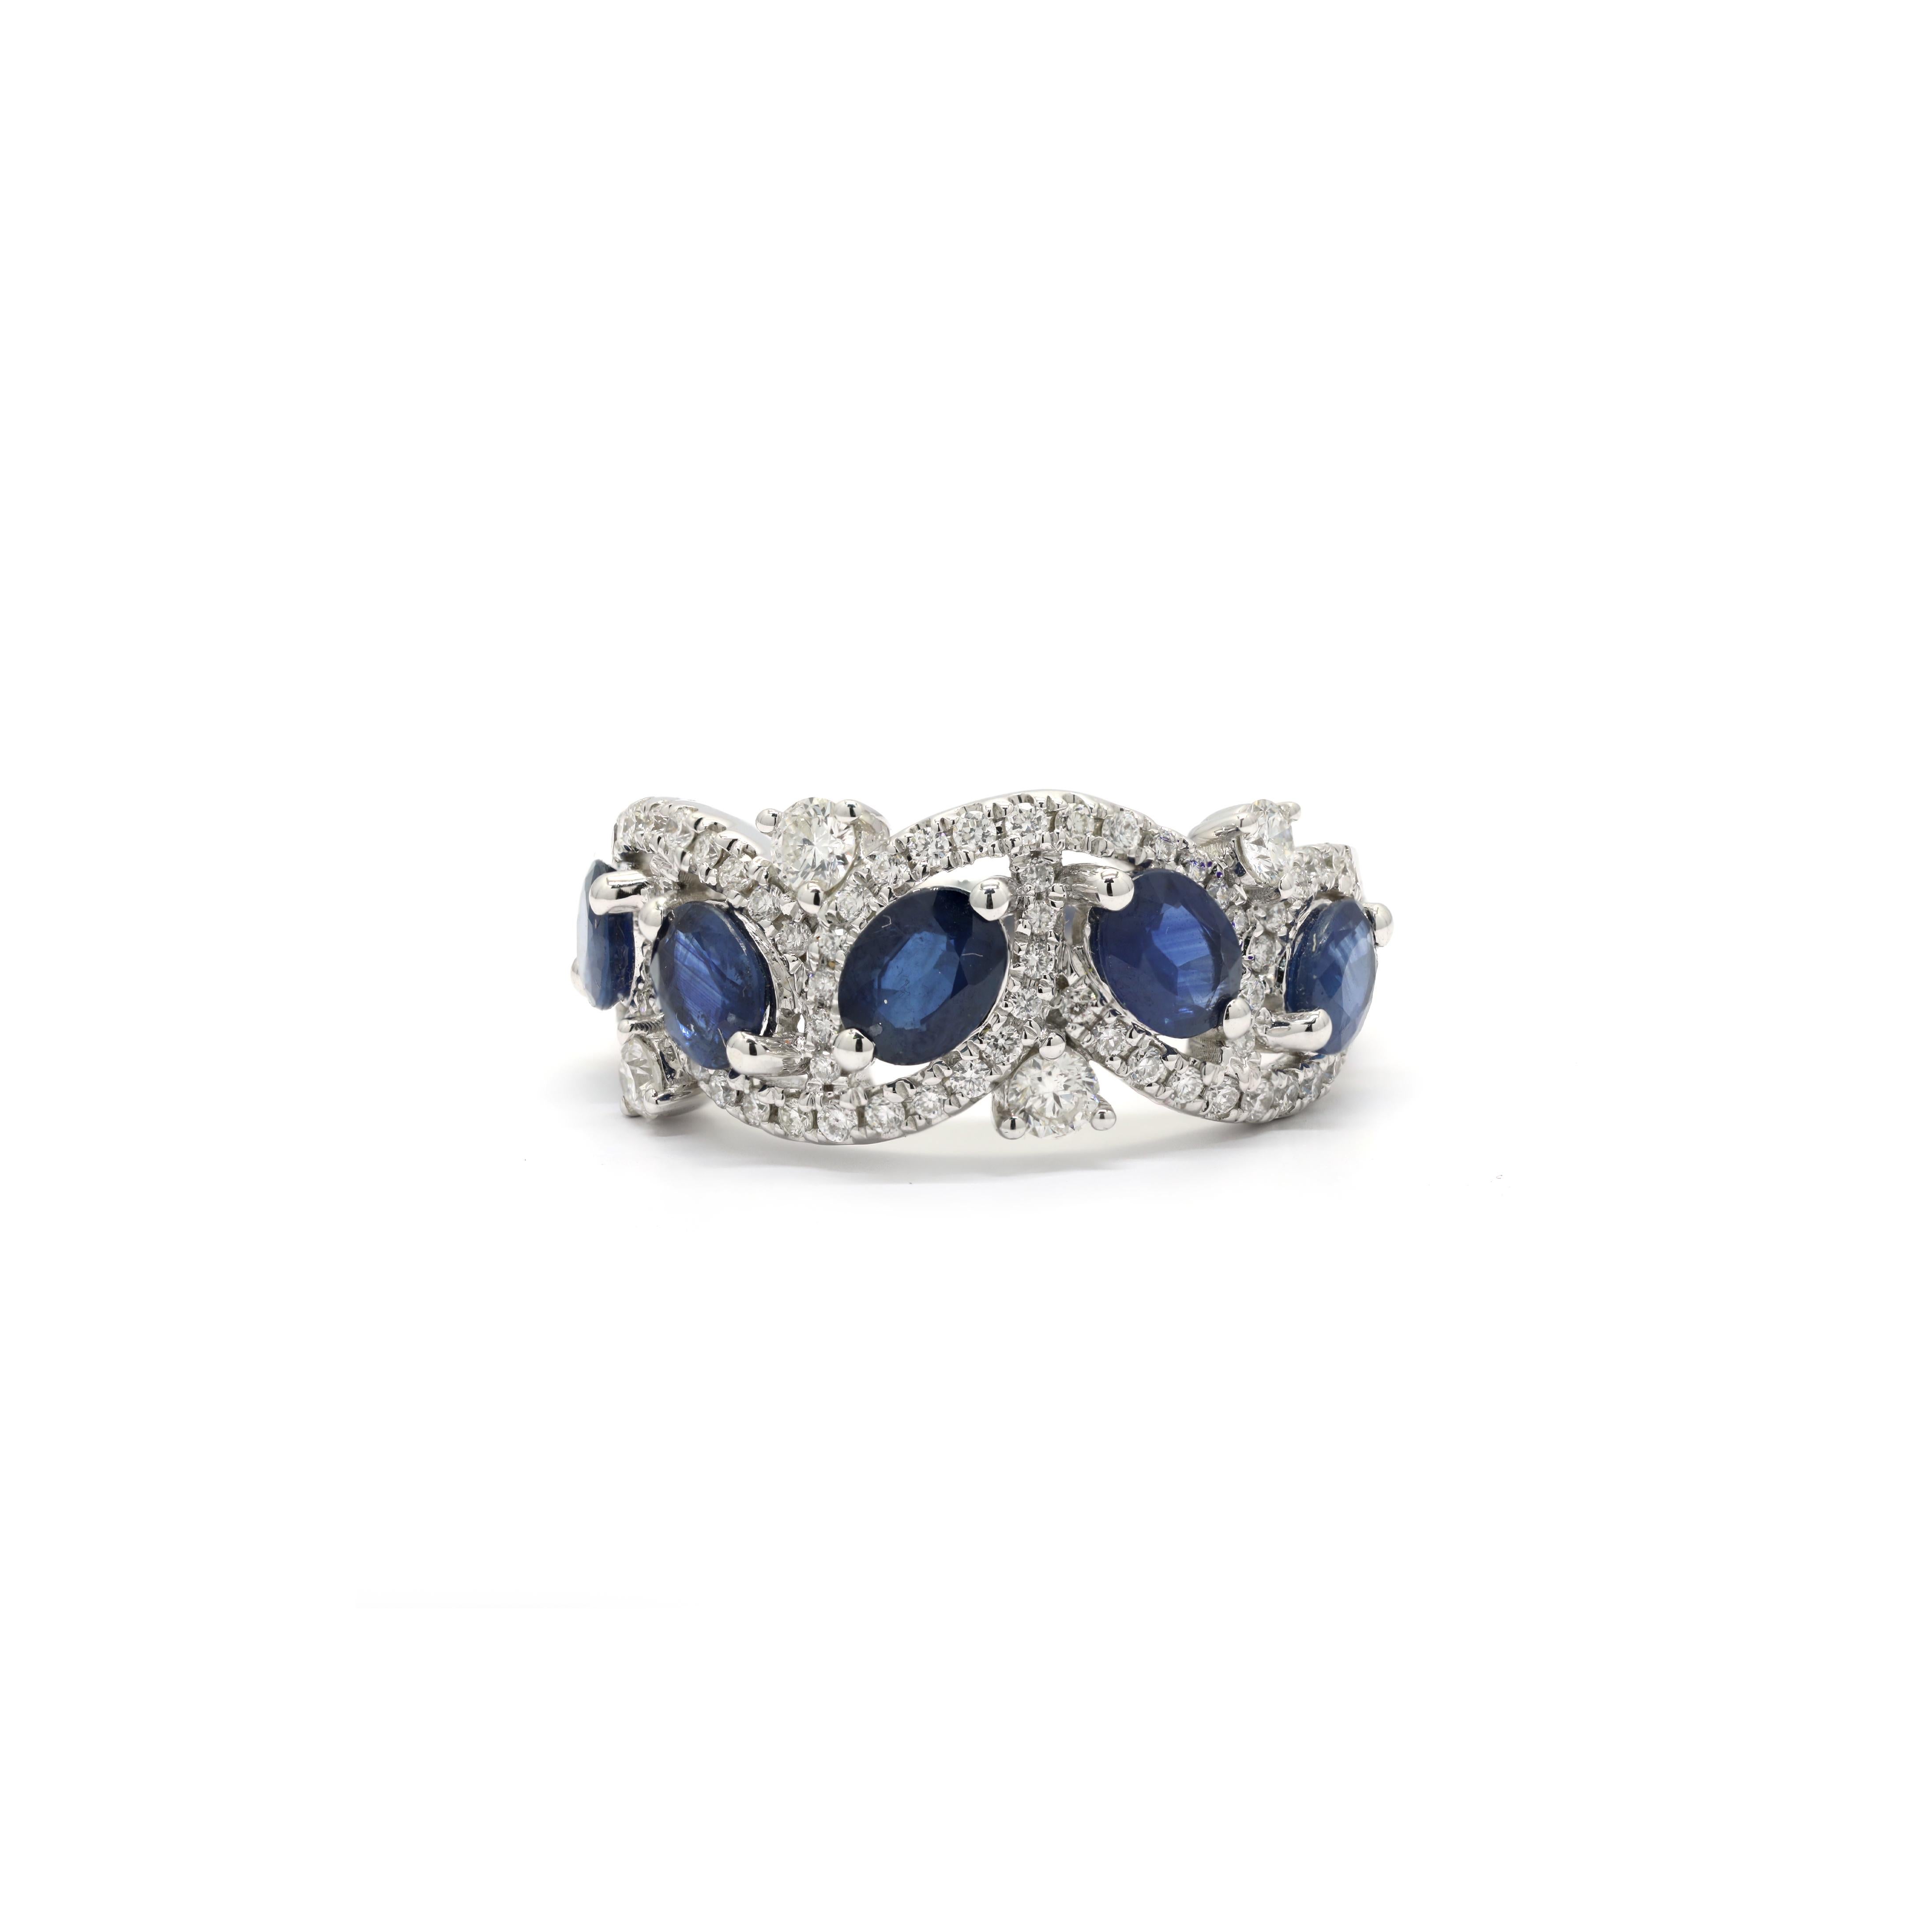 For Sale:  Oval Cut Blue Sapphire Diamond Ring in 14K White Gold  2